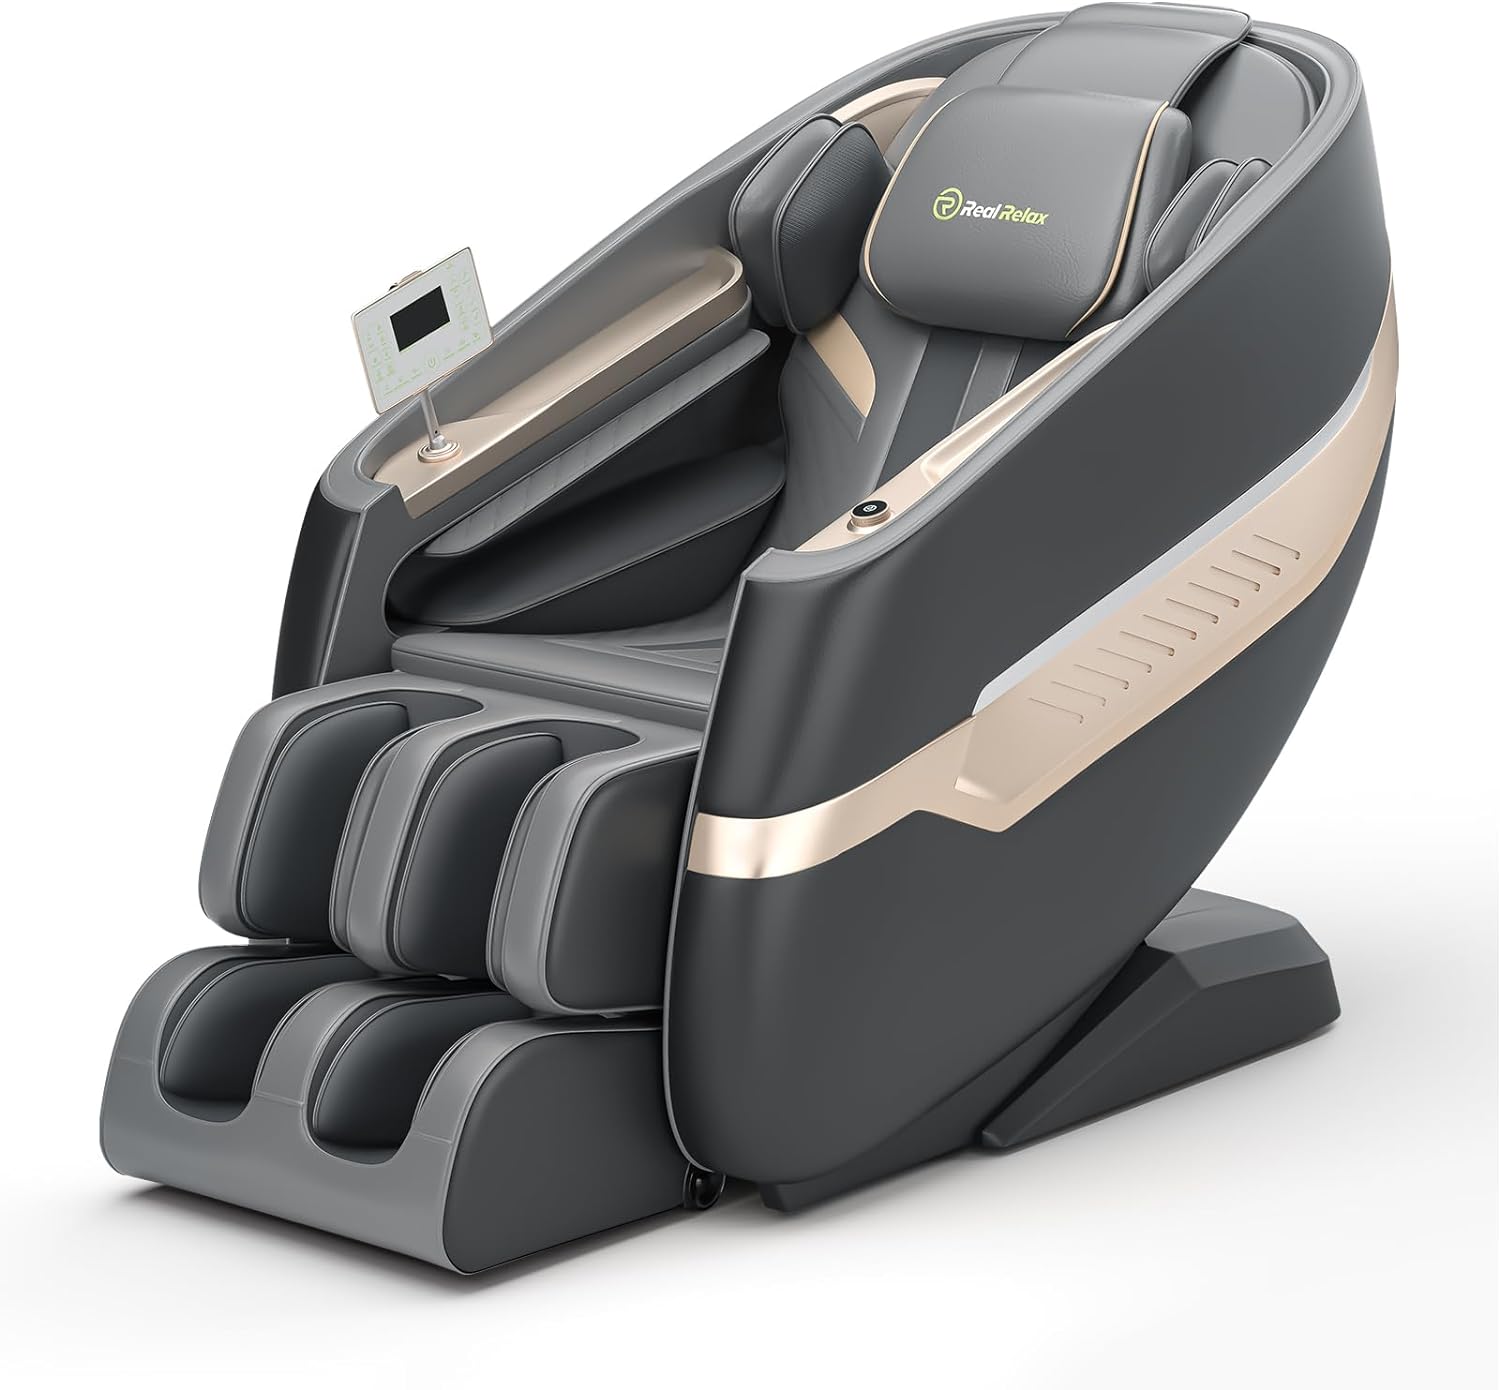 Real Relax Favor 09 Massage Chair Review Dive Into Ultimate Comfort Exploring The Real Relax